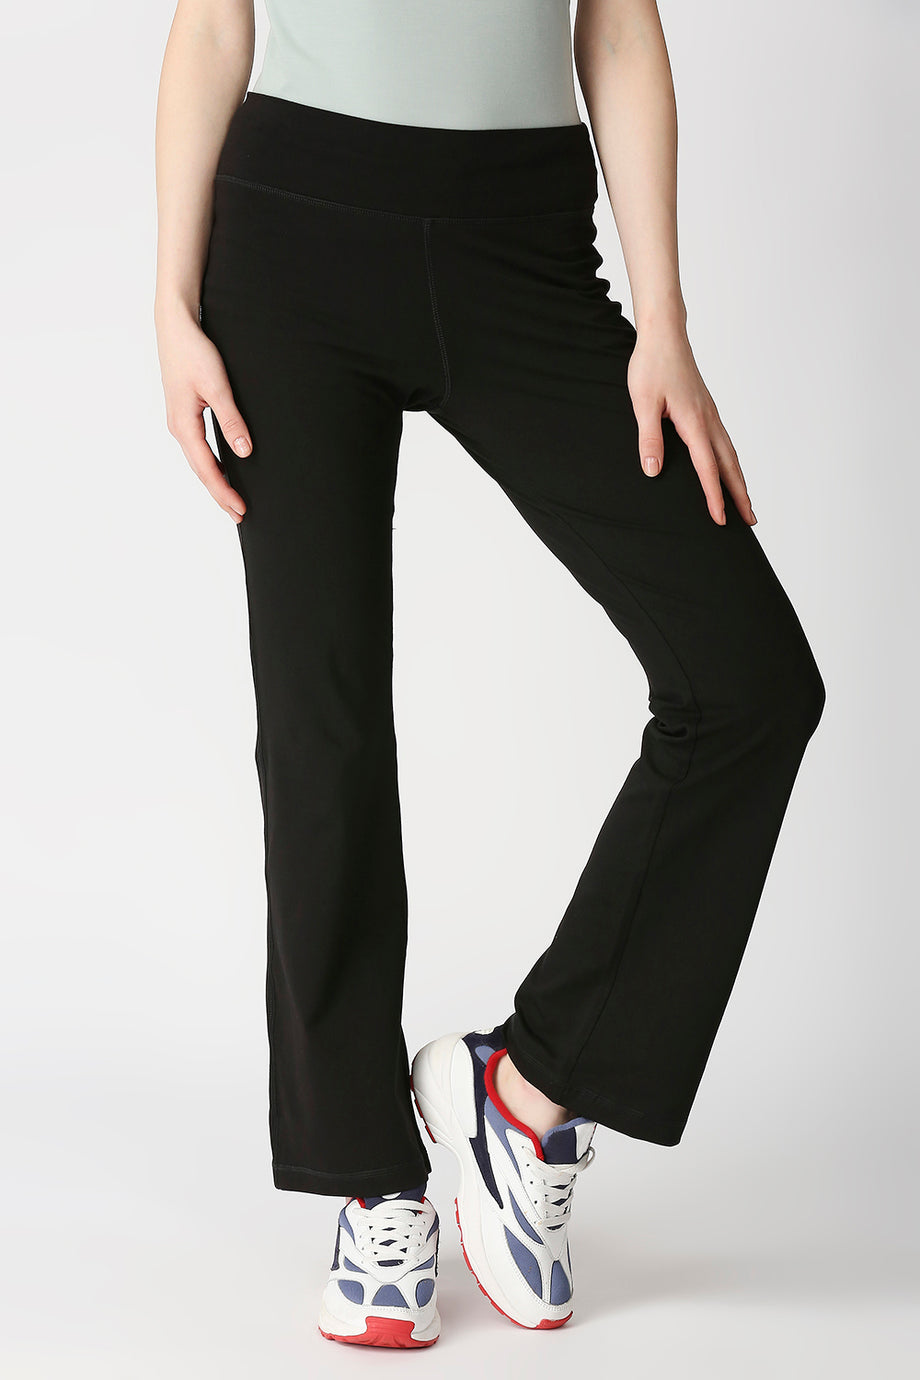 The Sporty Pants Trend That Will Rule this Spring (Working Out Not  Required) | Striped wide leg trousers, Striped wide leg pants, Sporty pants